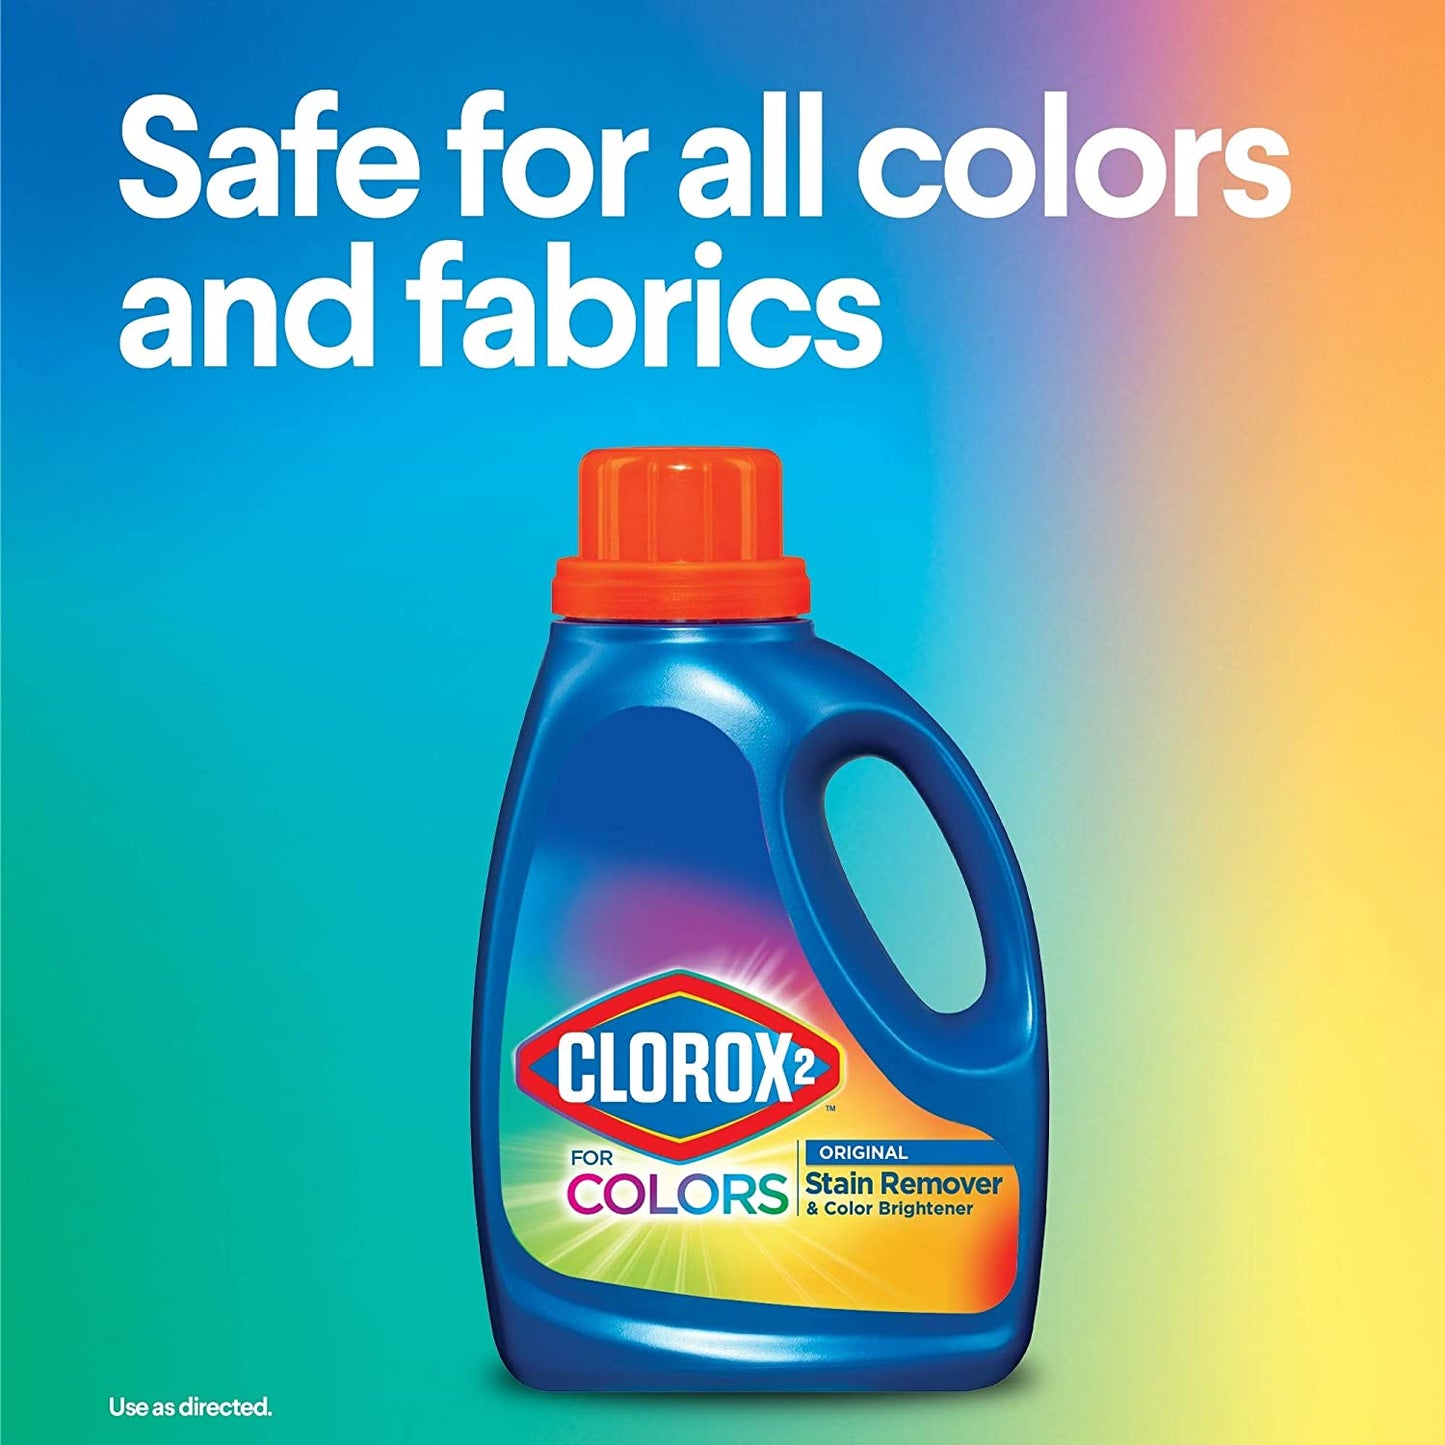 Clorox 2 Stain Remover and Color Brightener, 22 Ounces (Packaging May Vary)